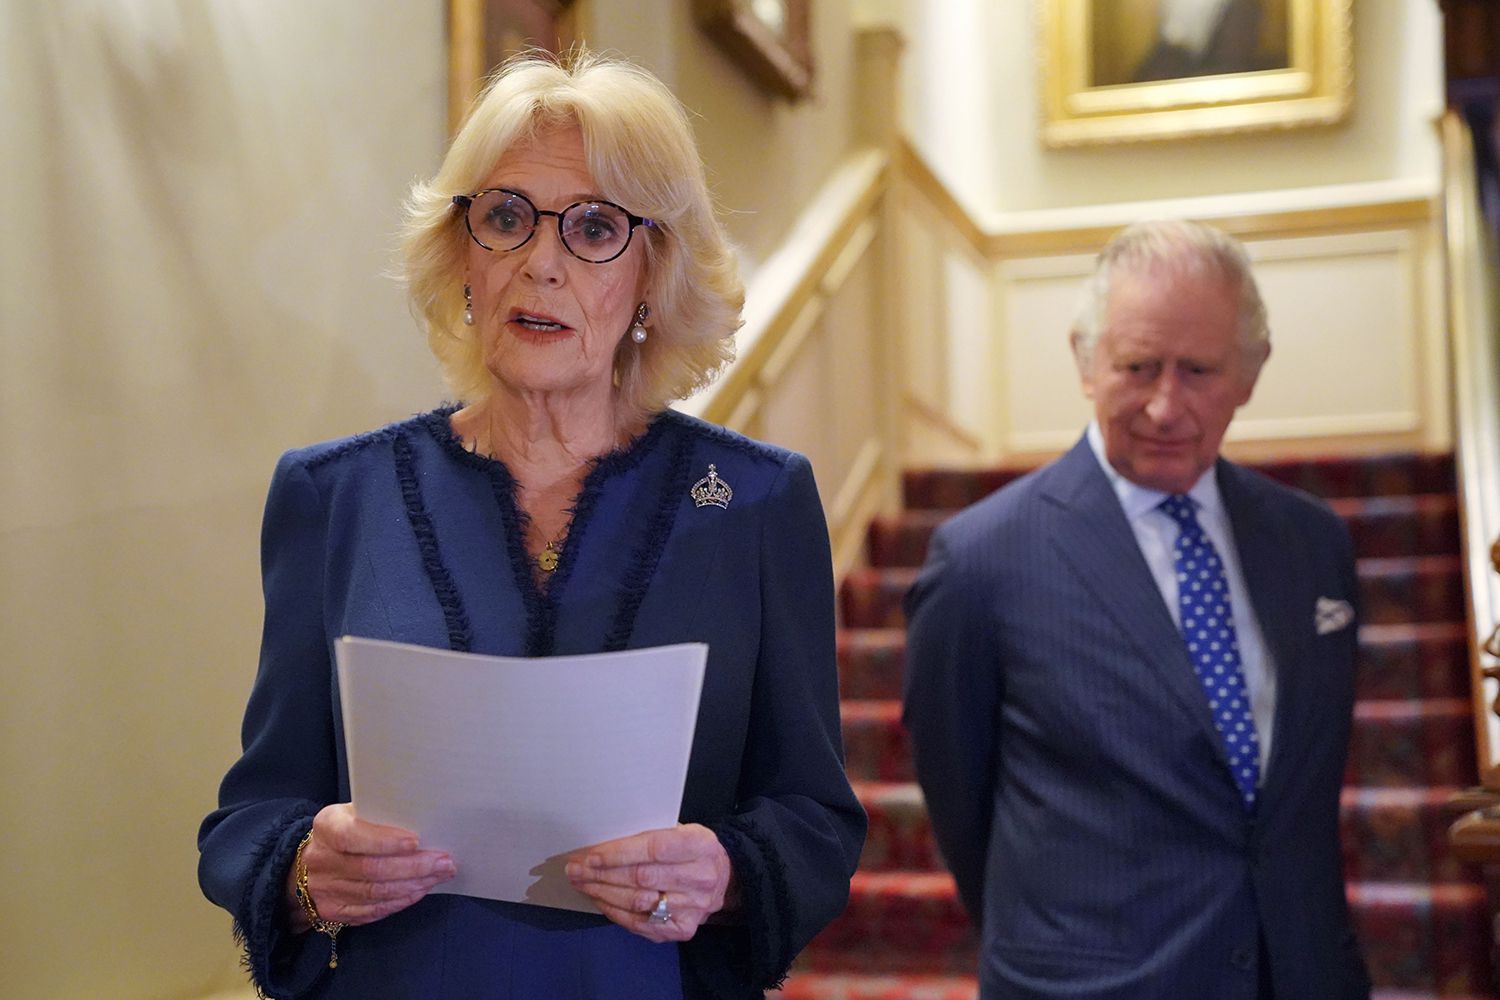 Camilla, Queen Consort, joined by King Charles III, speaks as she hosts a reception at Clarence House for authors, members of the literary community and representatives of literacy charities, to celebrate the second anniversary of The Reading Room on February 23, 2023 in London, England.